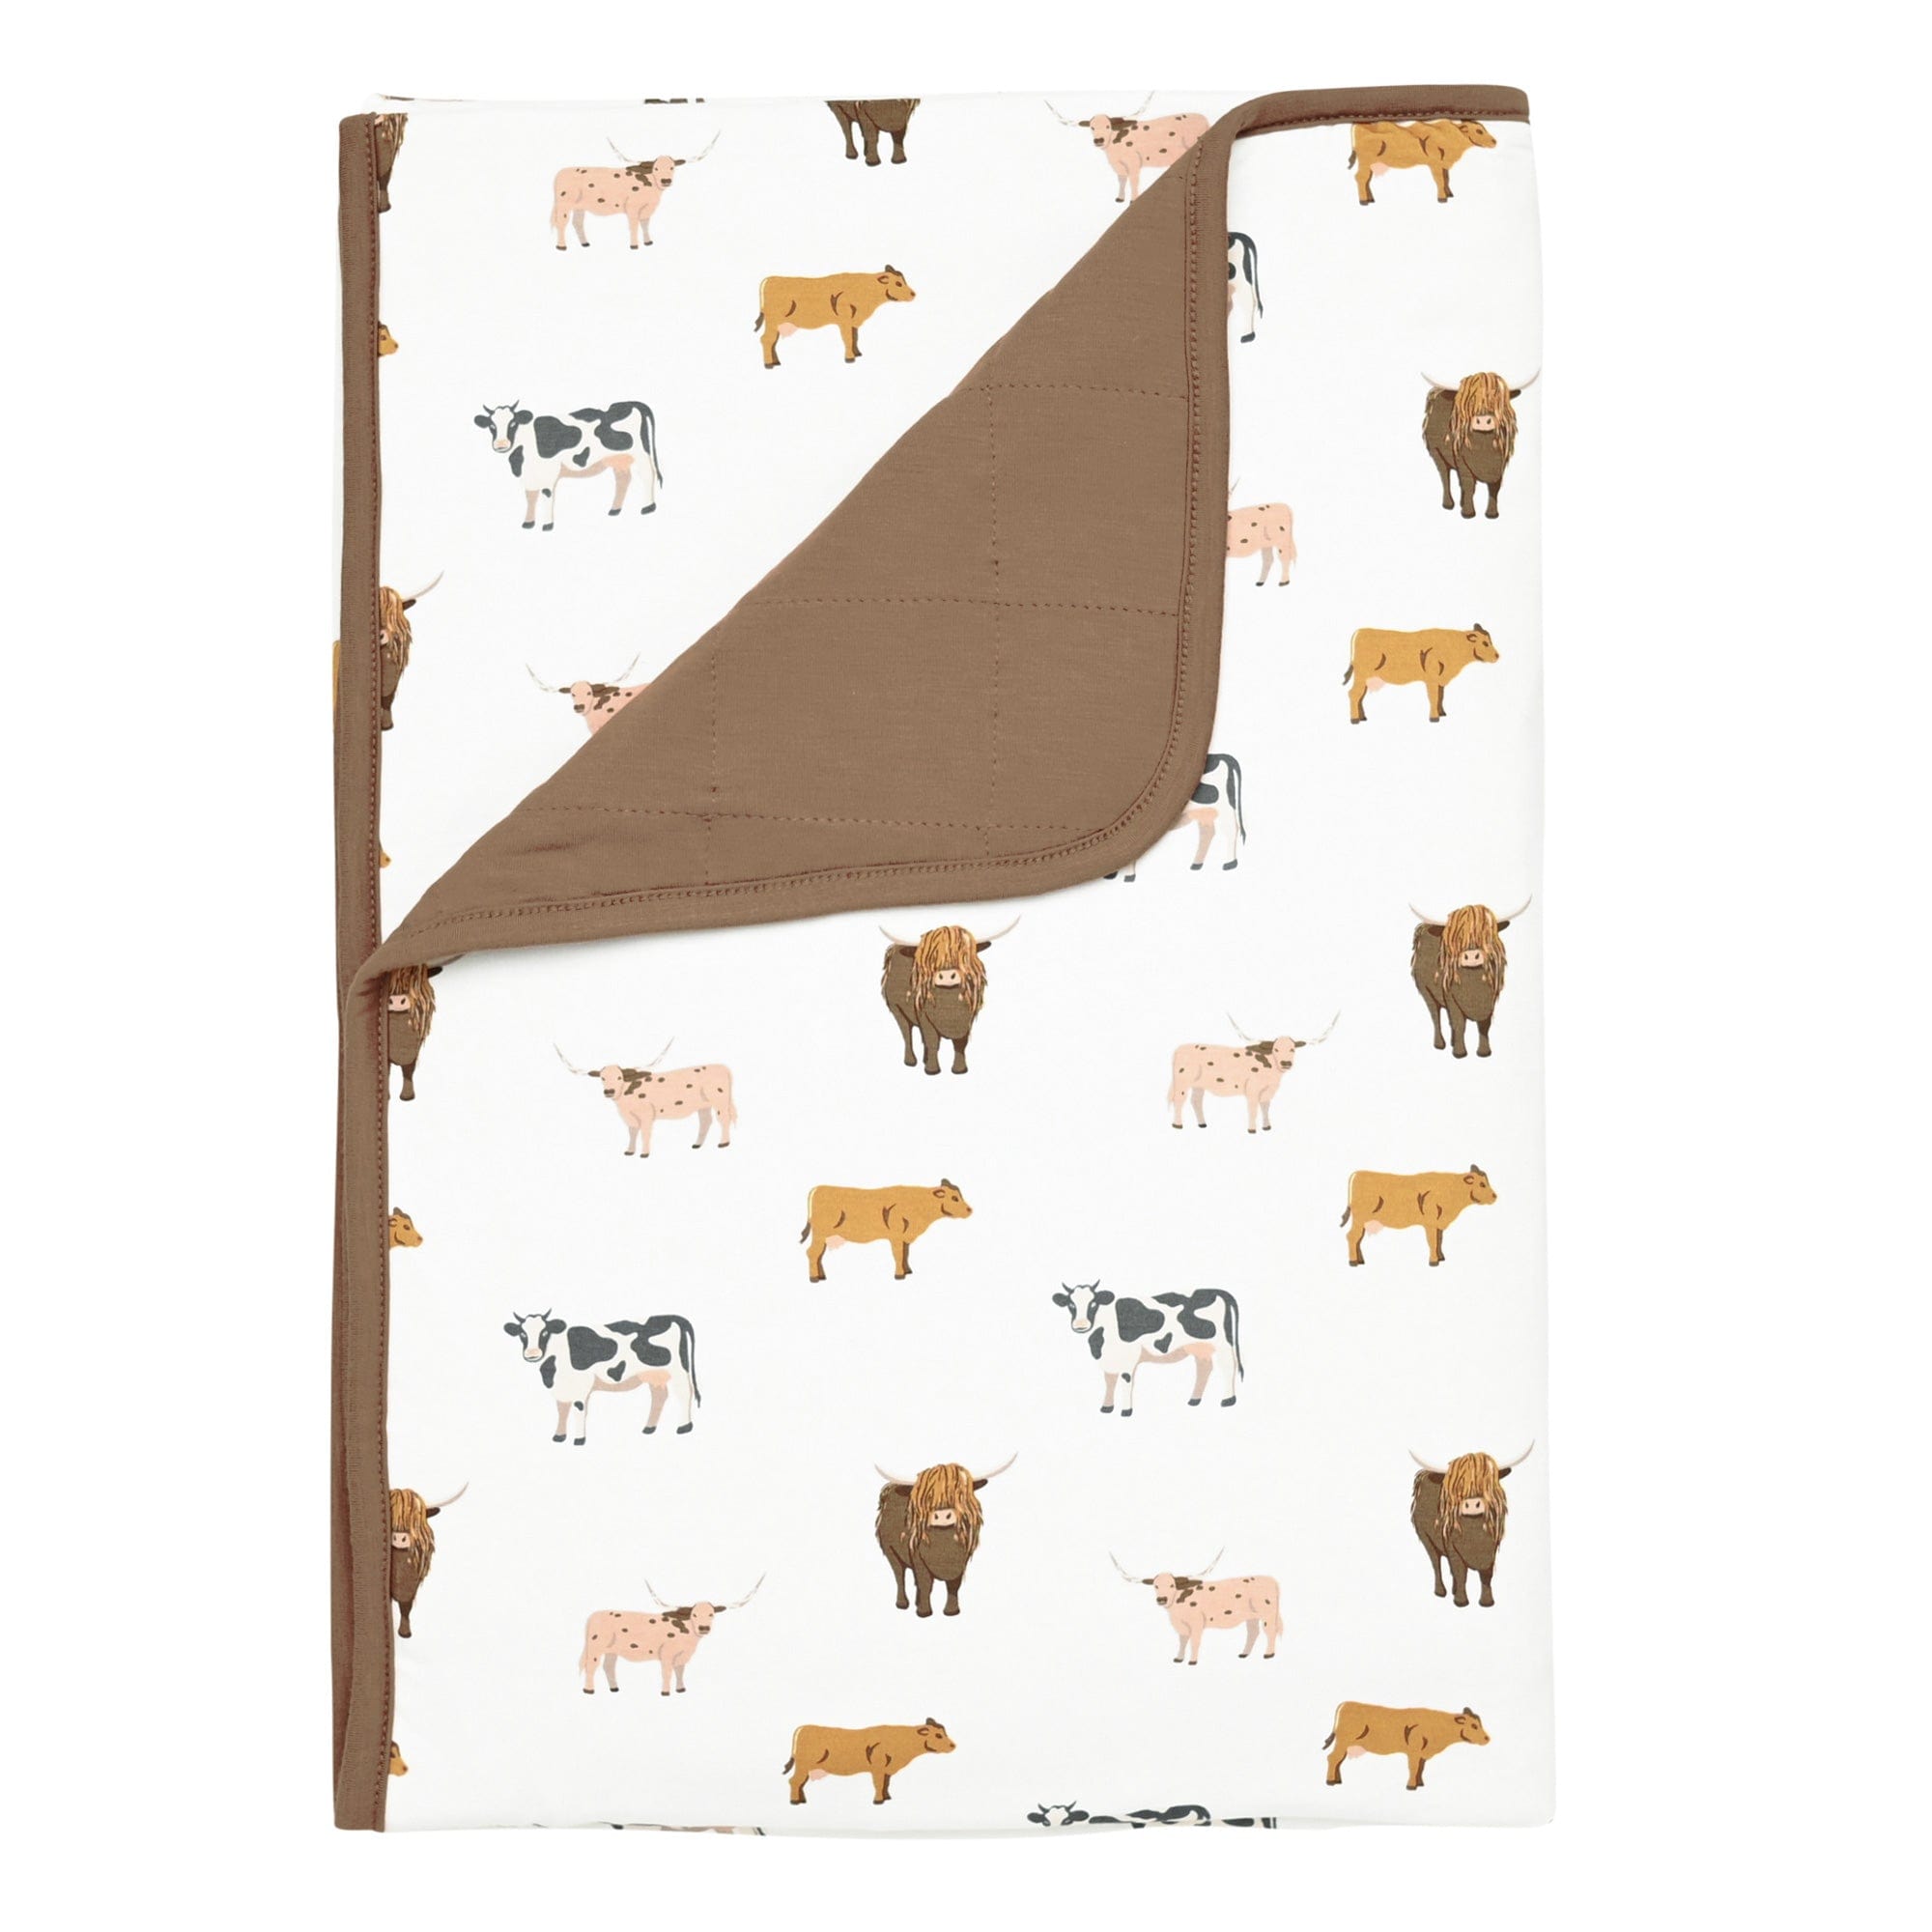 Moo Cow Baby Quilt Kit